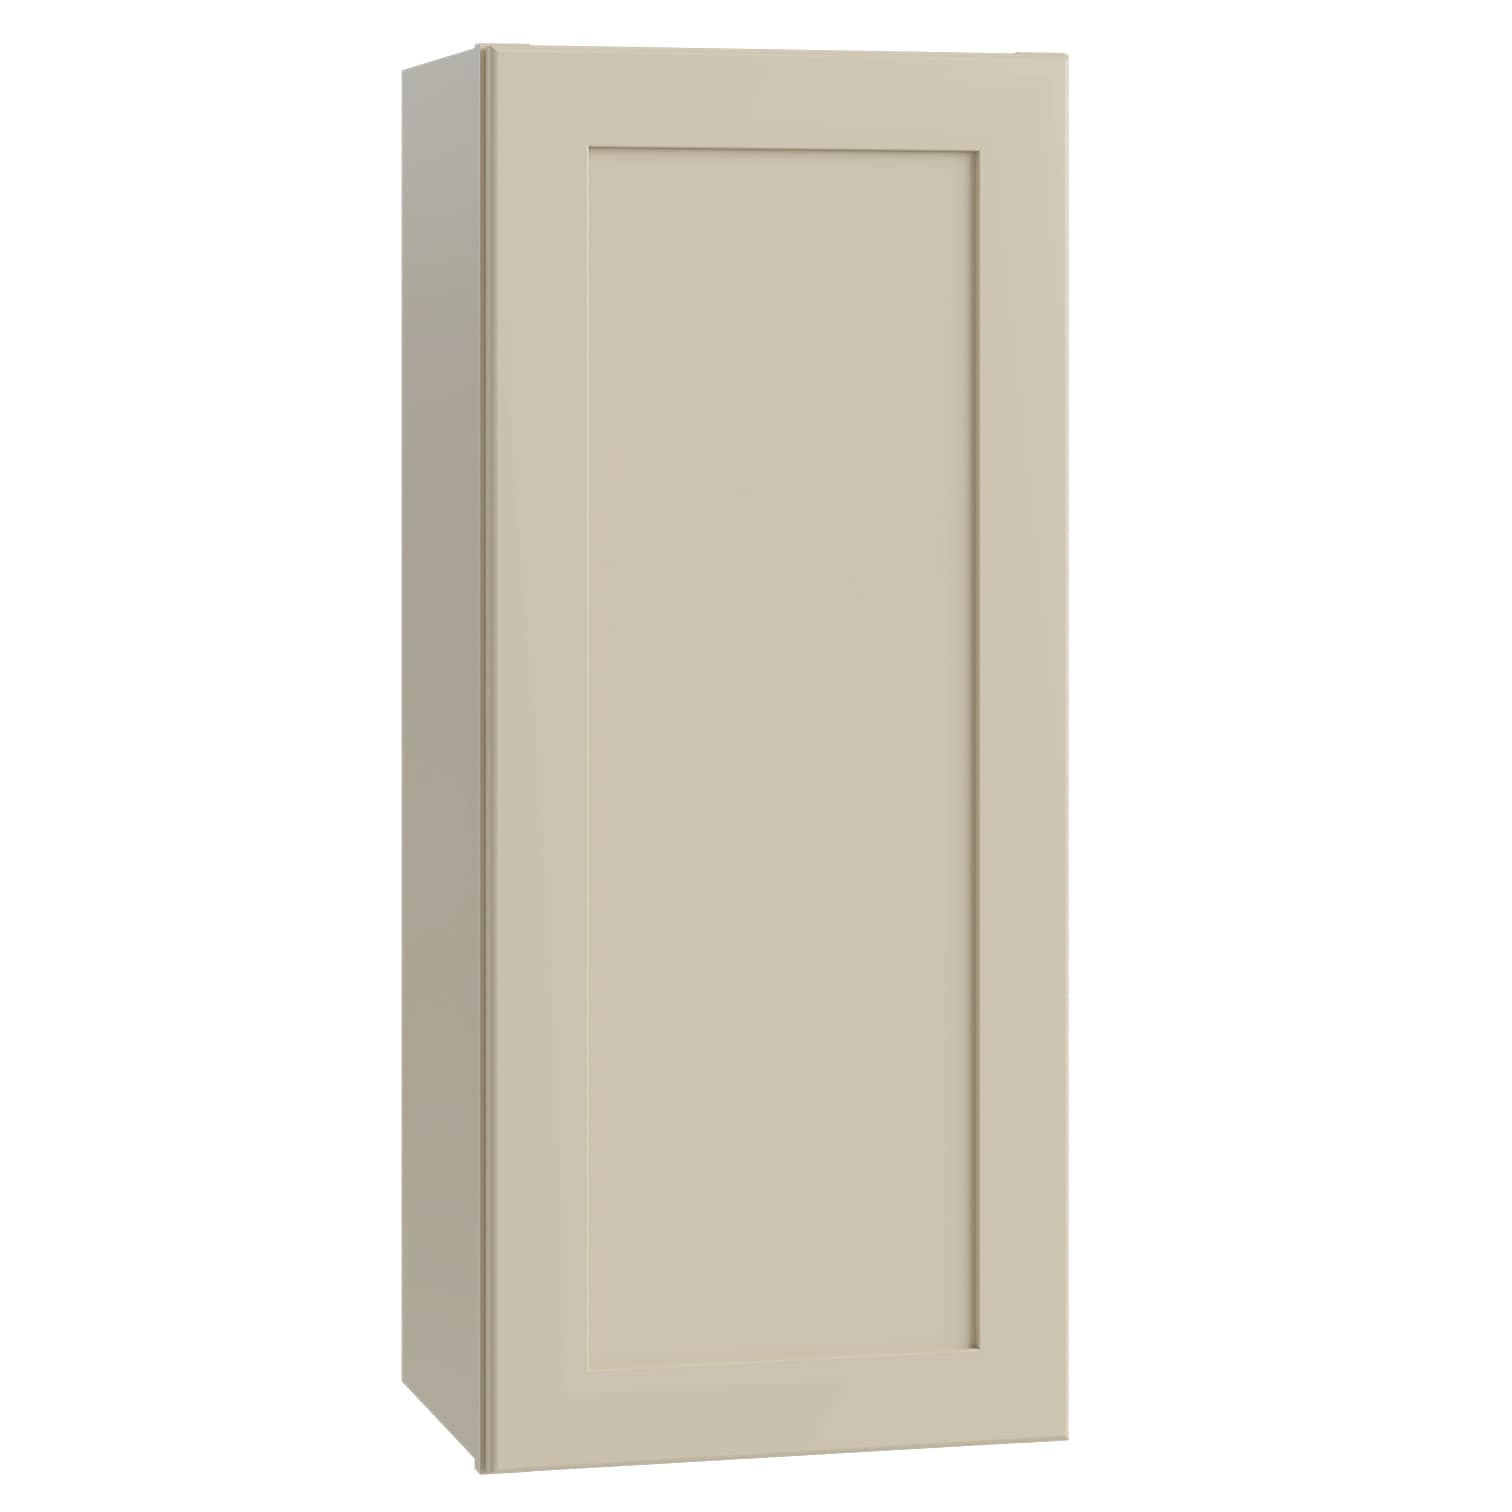 Luxxe Cabinetry 18-in W x 36-in H x 12-in D Norfolk Blended Cream Painted Door Wall Fully Assembled Semi-custom Cabinet in Off-White | W1836L-NBC